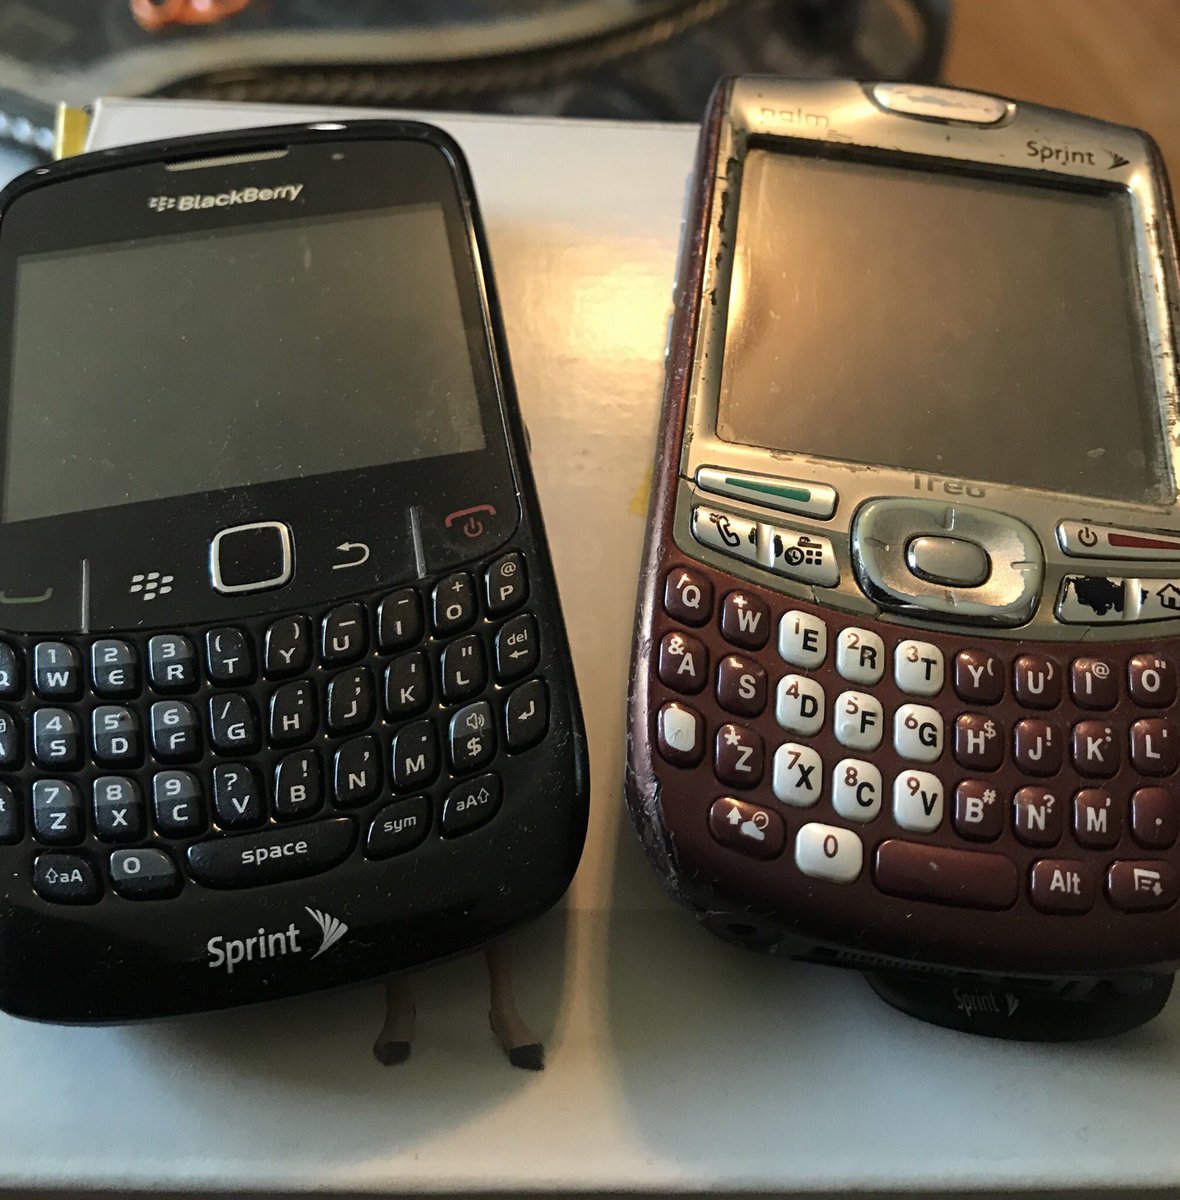 Found these treasures! Remembering when life was simpler. #backintheday #palmtreo #blacberry #kickinitoldschool #TransferRiskToMarilyn